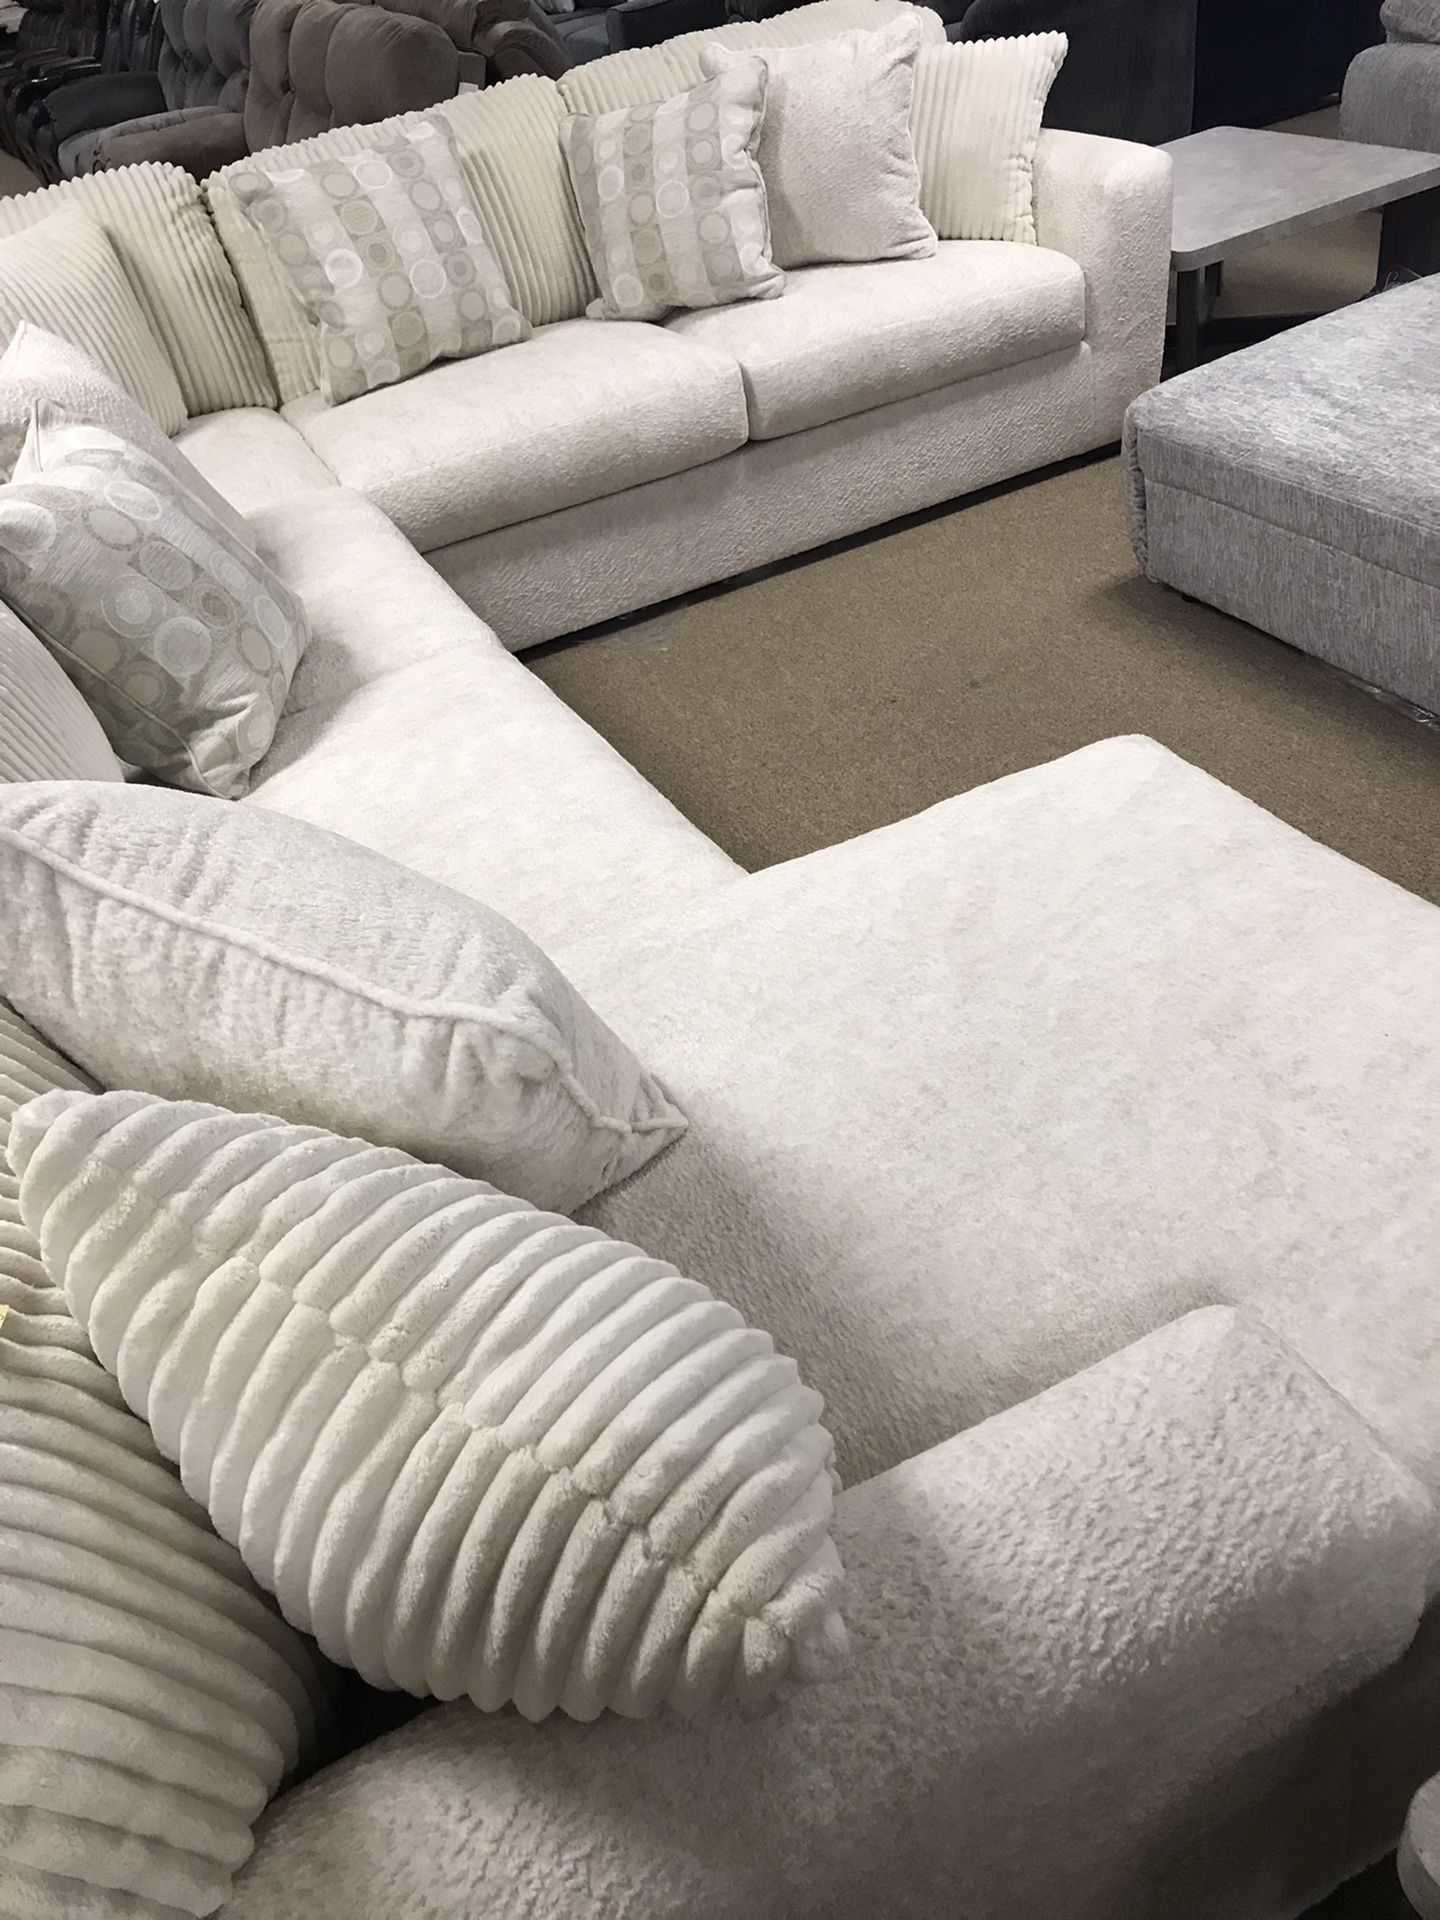 Gorgeous Stunning Cozy Ultimate Sectional!